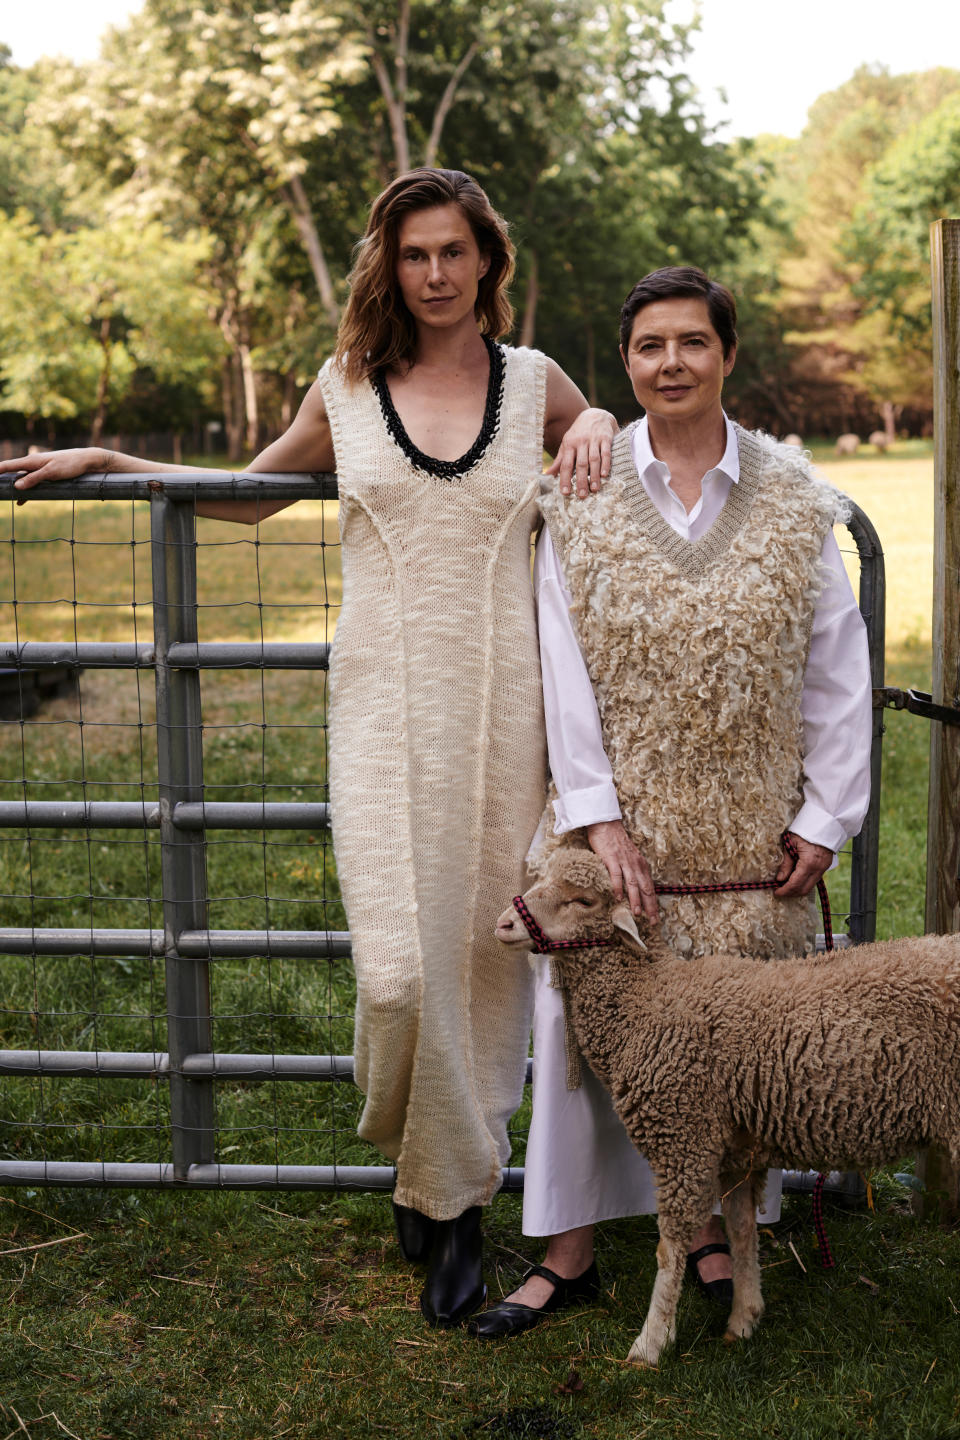 Elettra Wiedemann and Isabella Rossellini wearing styles from the Made for Moda: Aisling Camps at Mama Farm capsule.